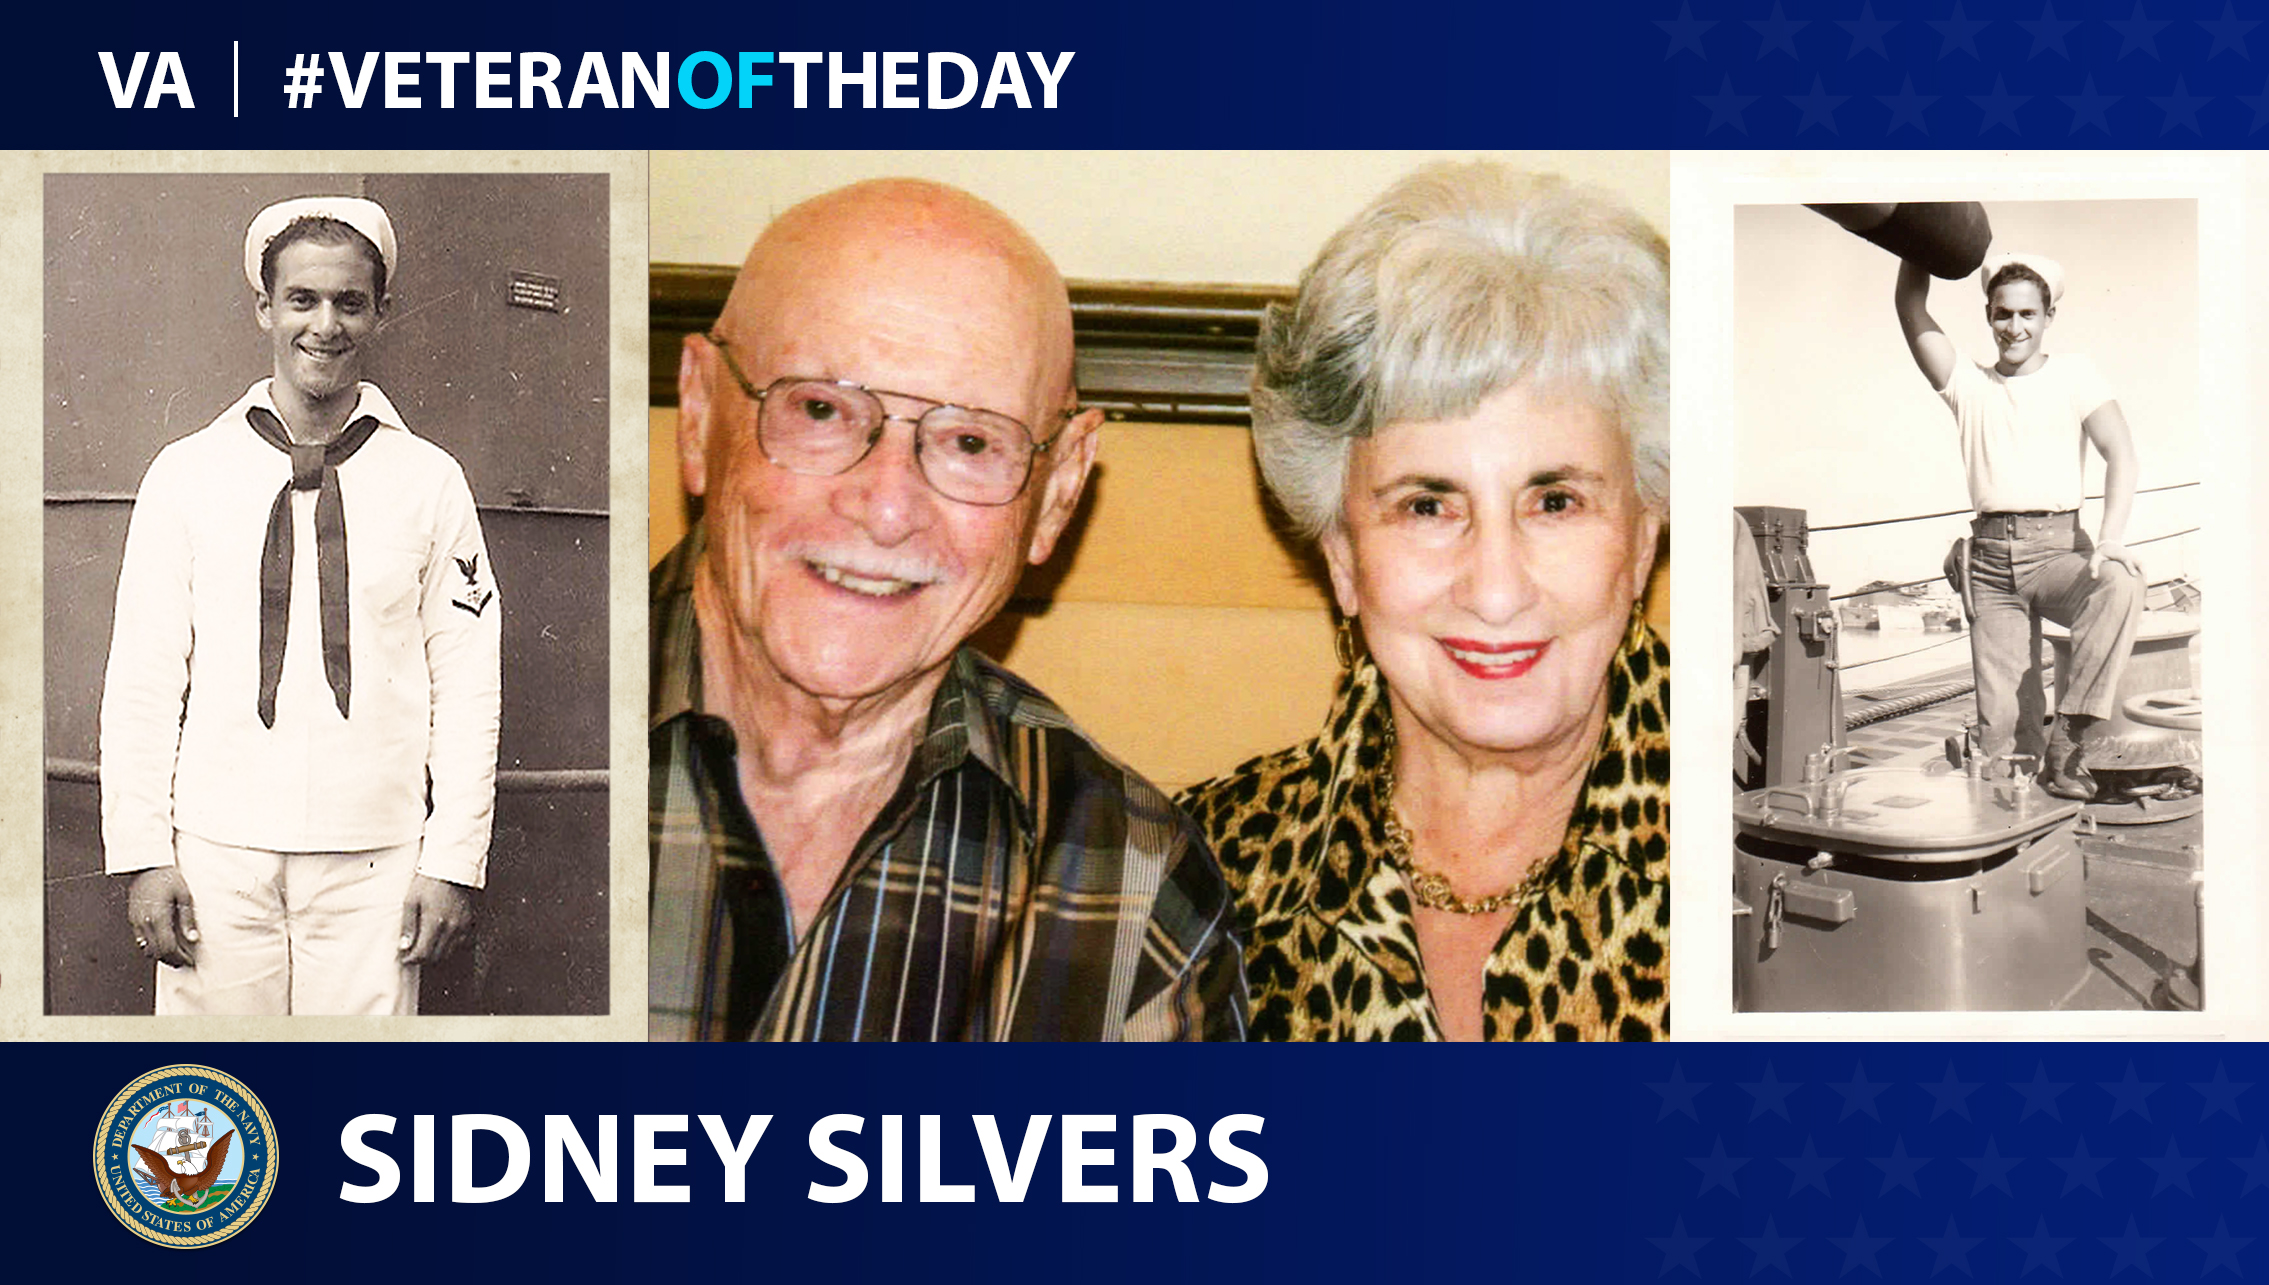 Navy Veteran Sidney Silvers is today's Veteran of the Day.